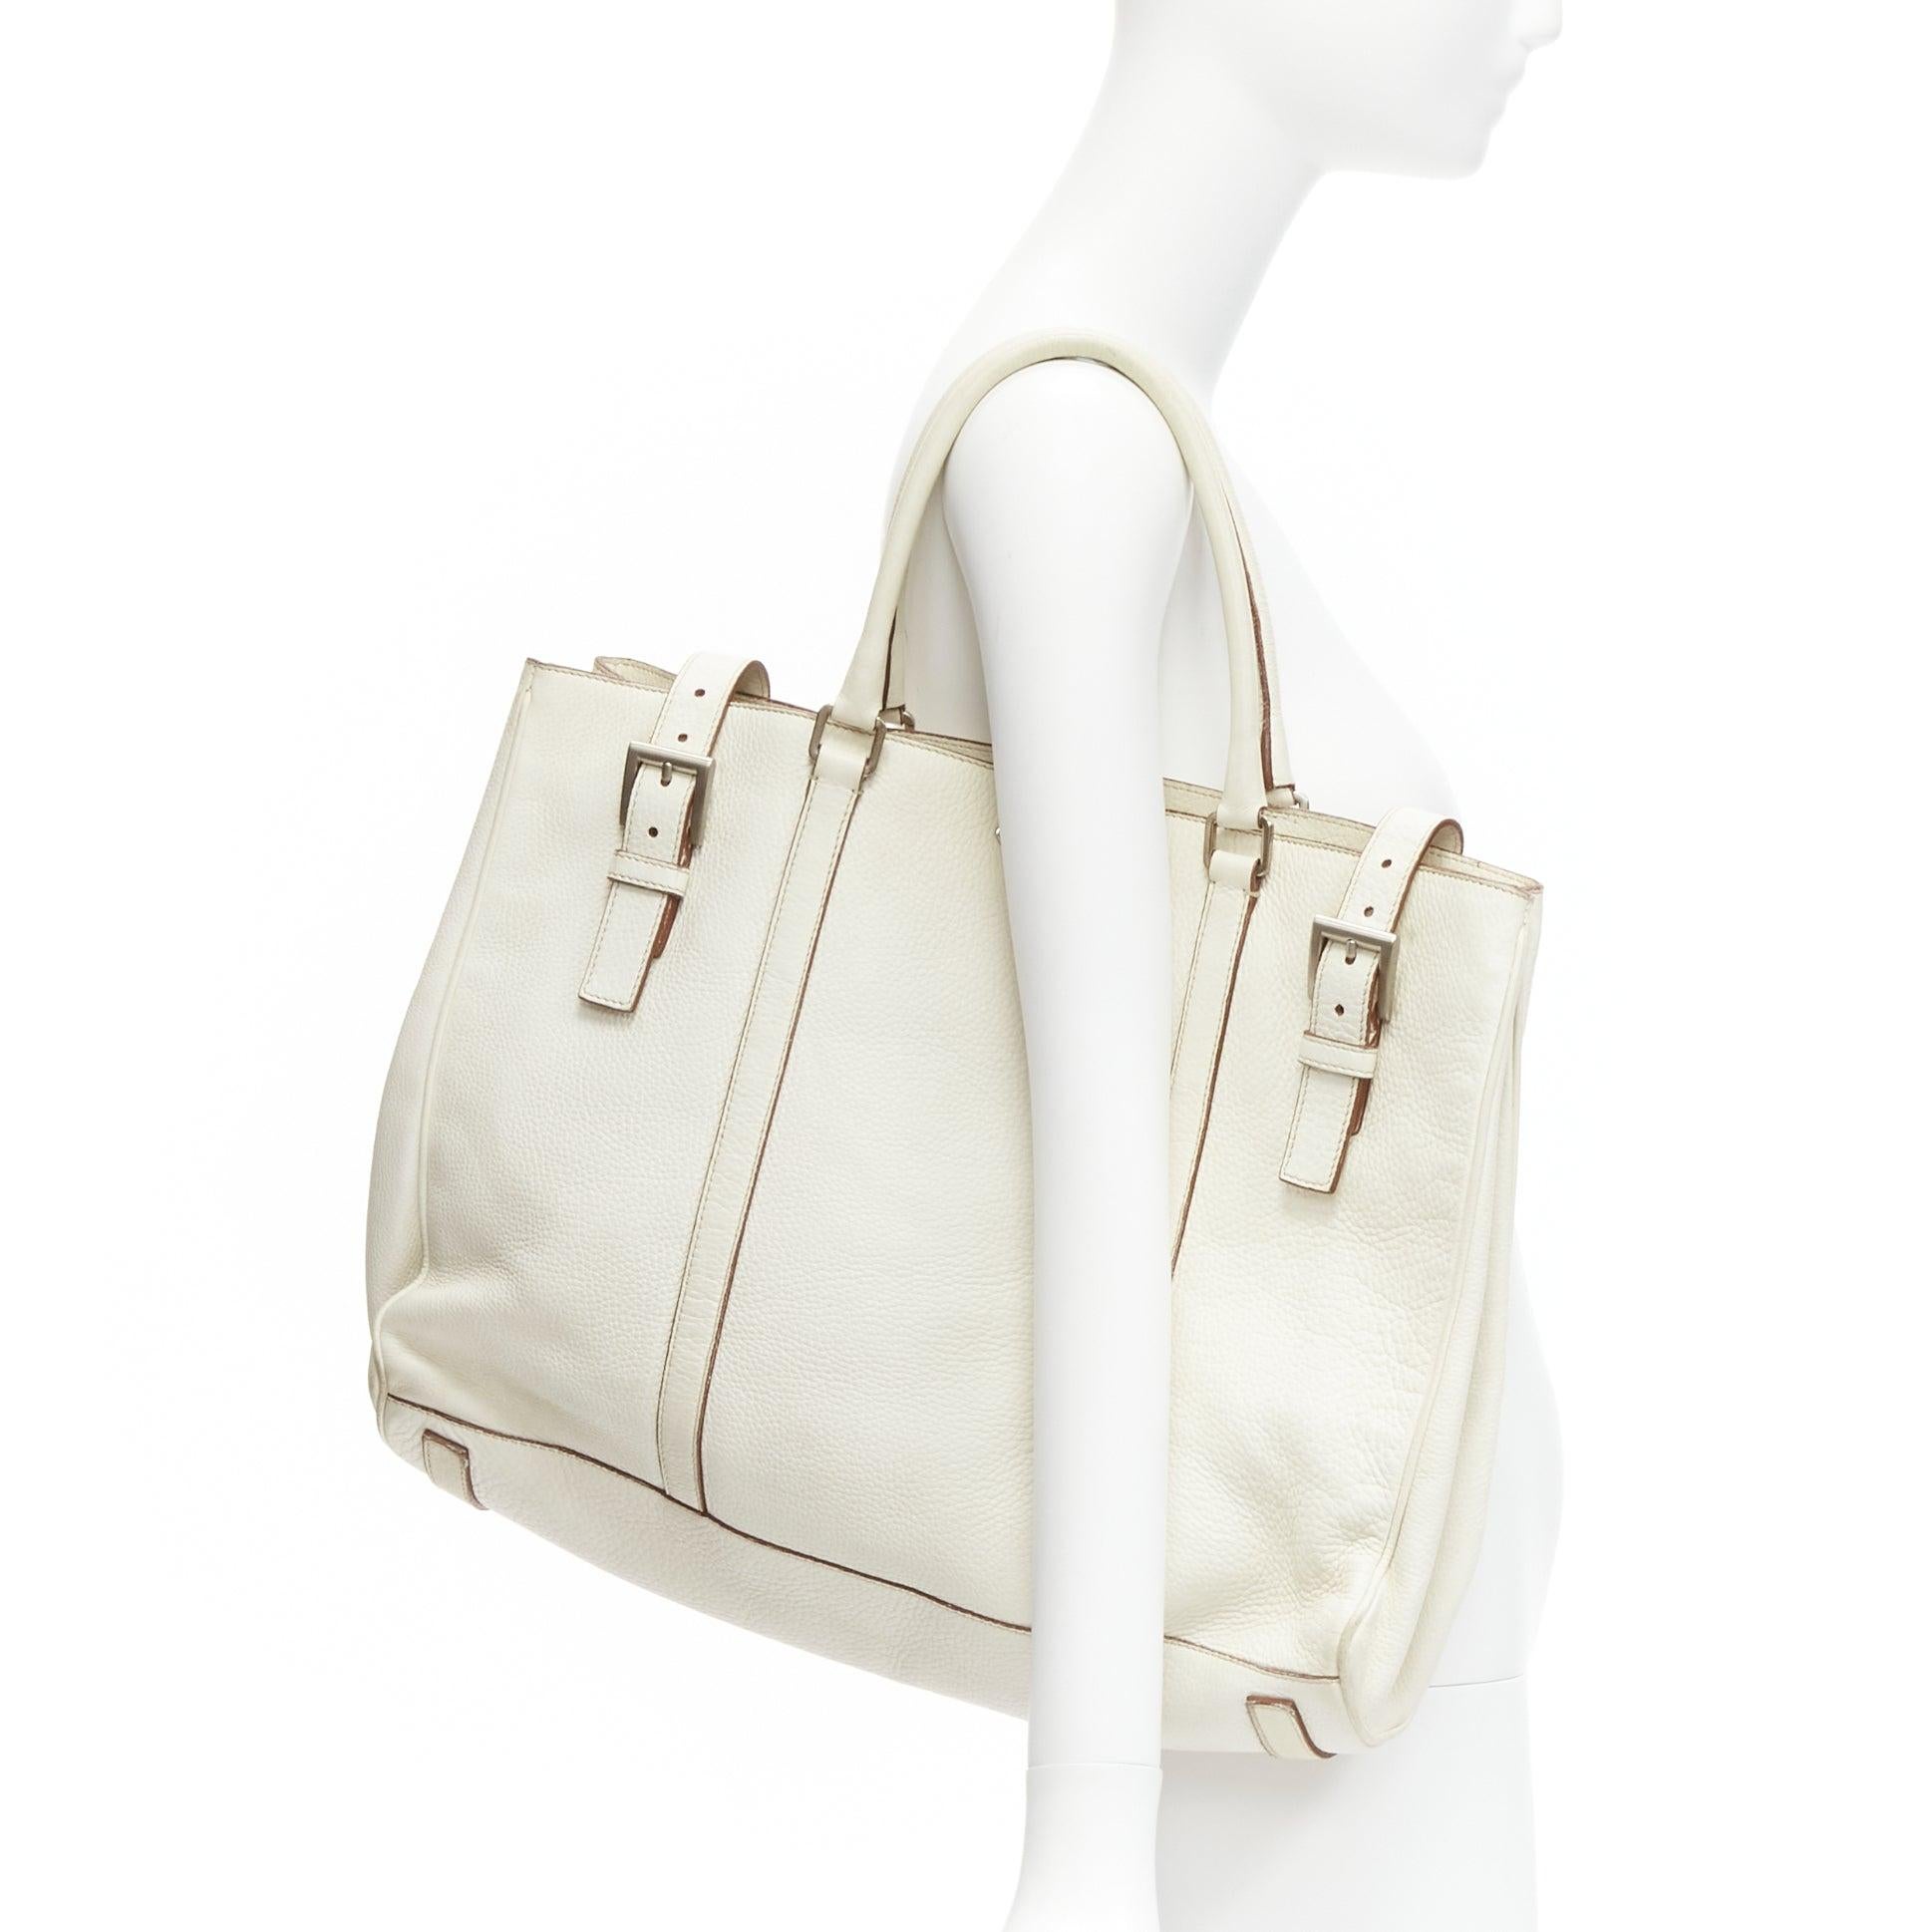 PRADA ivory white grained leather silver triangle logo buckle strap tote bag
Reference: GIYG/A00293
Brand: Prada
Designer: Miuccia Prada
Material: Leather
Color: White
Pattern: Solid
Closure: Buckle
Lining: Brown Leather
Made in: